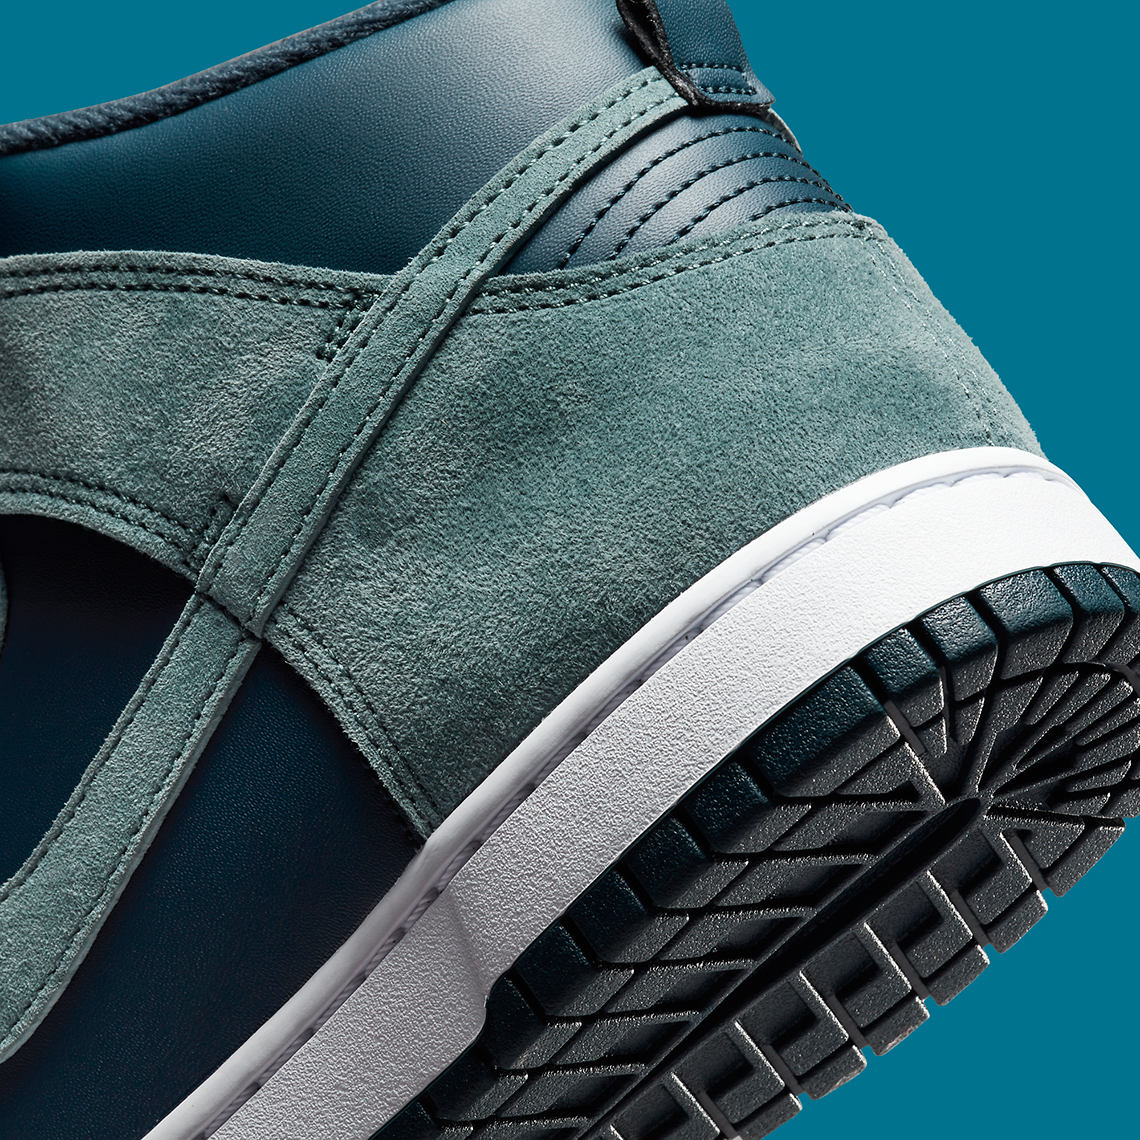 nike Dunk shop high teal suede 5